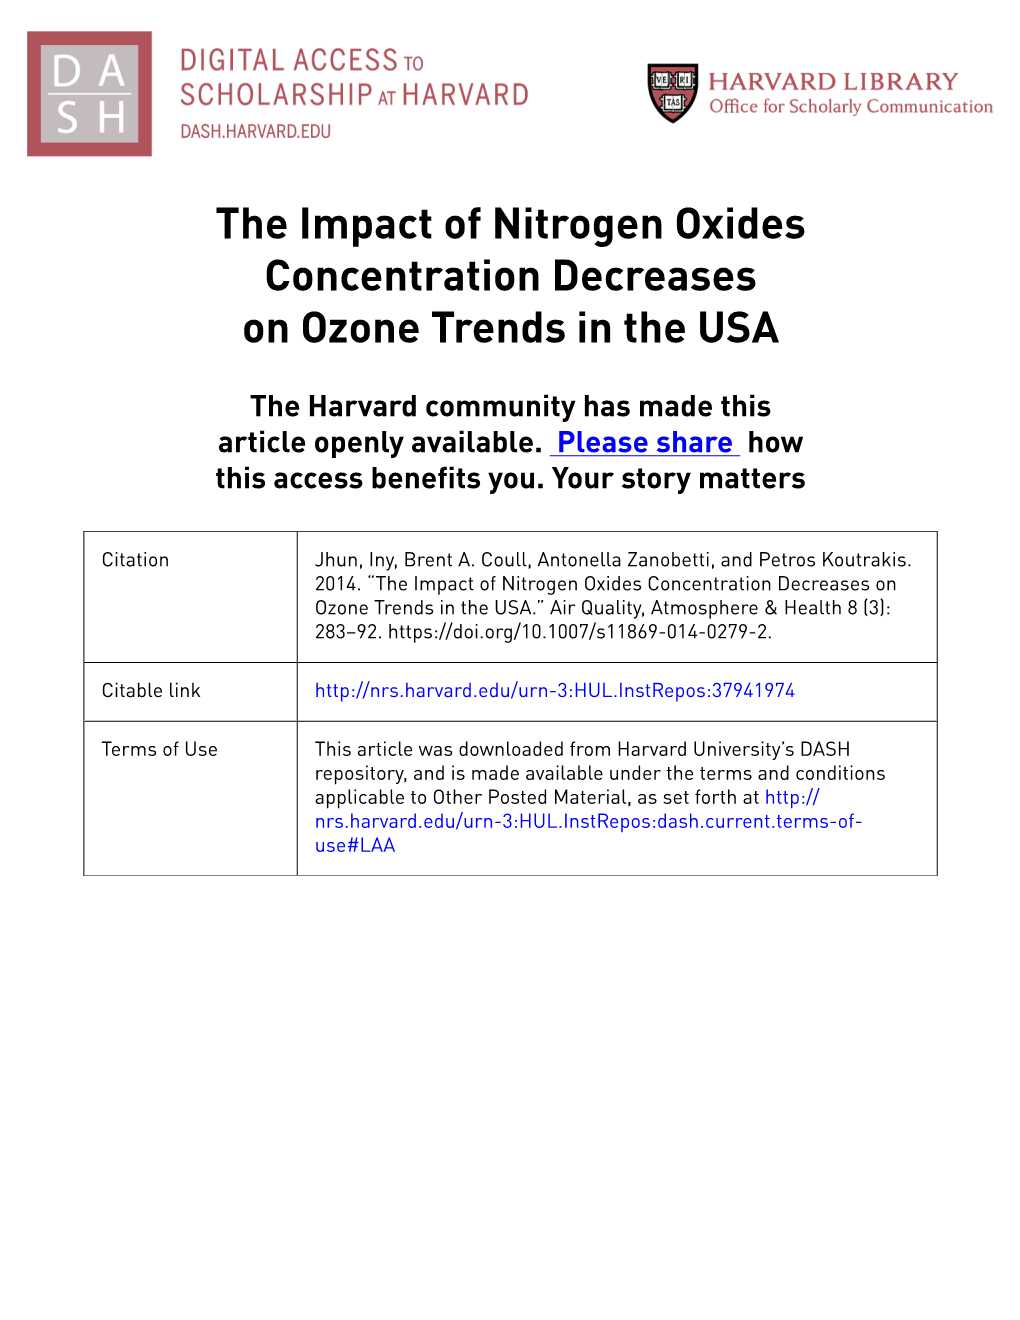 The Impact of Nitrogen Oxides Concentration Decreases on Ozone Trends in the USA